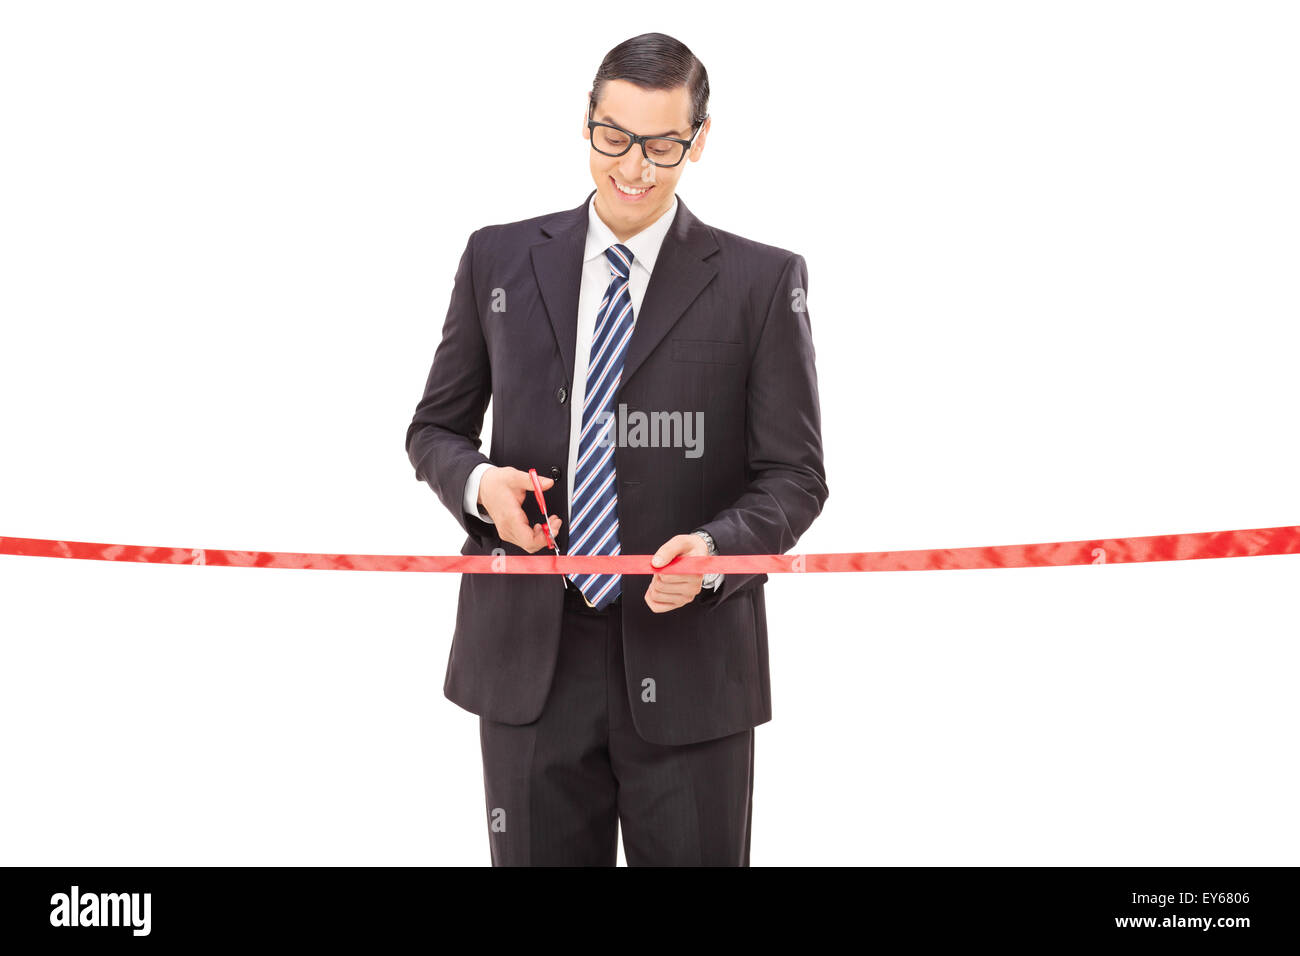 Joyful young businessman cutting a red ribbon with scissors isolated on white background Stock Photo